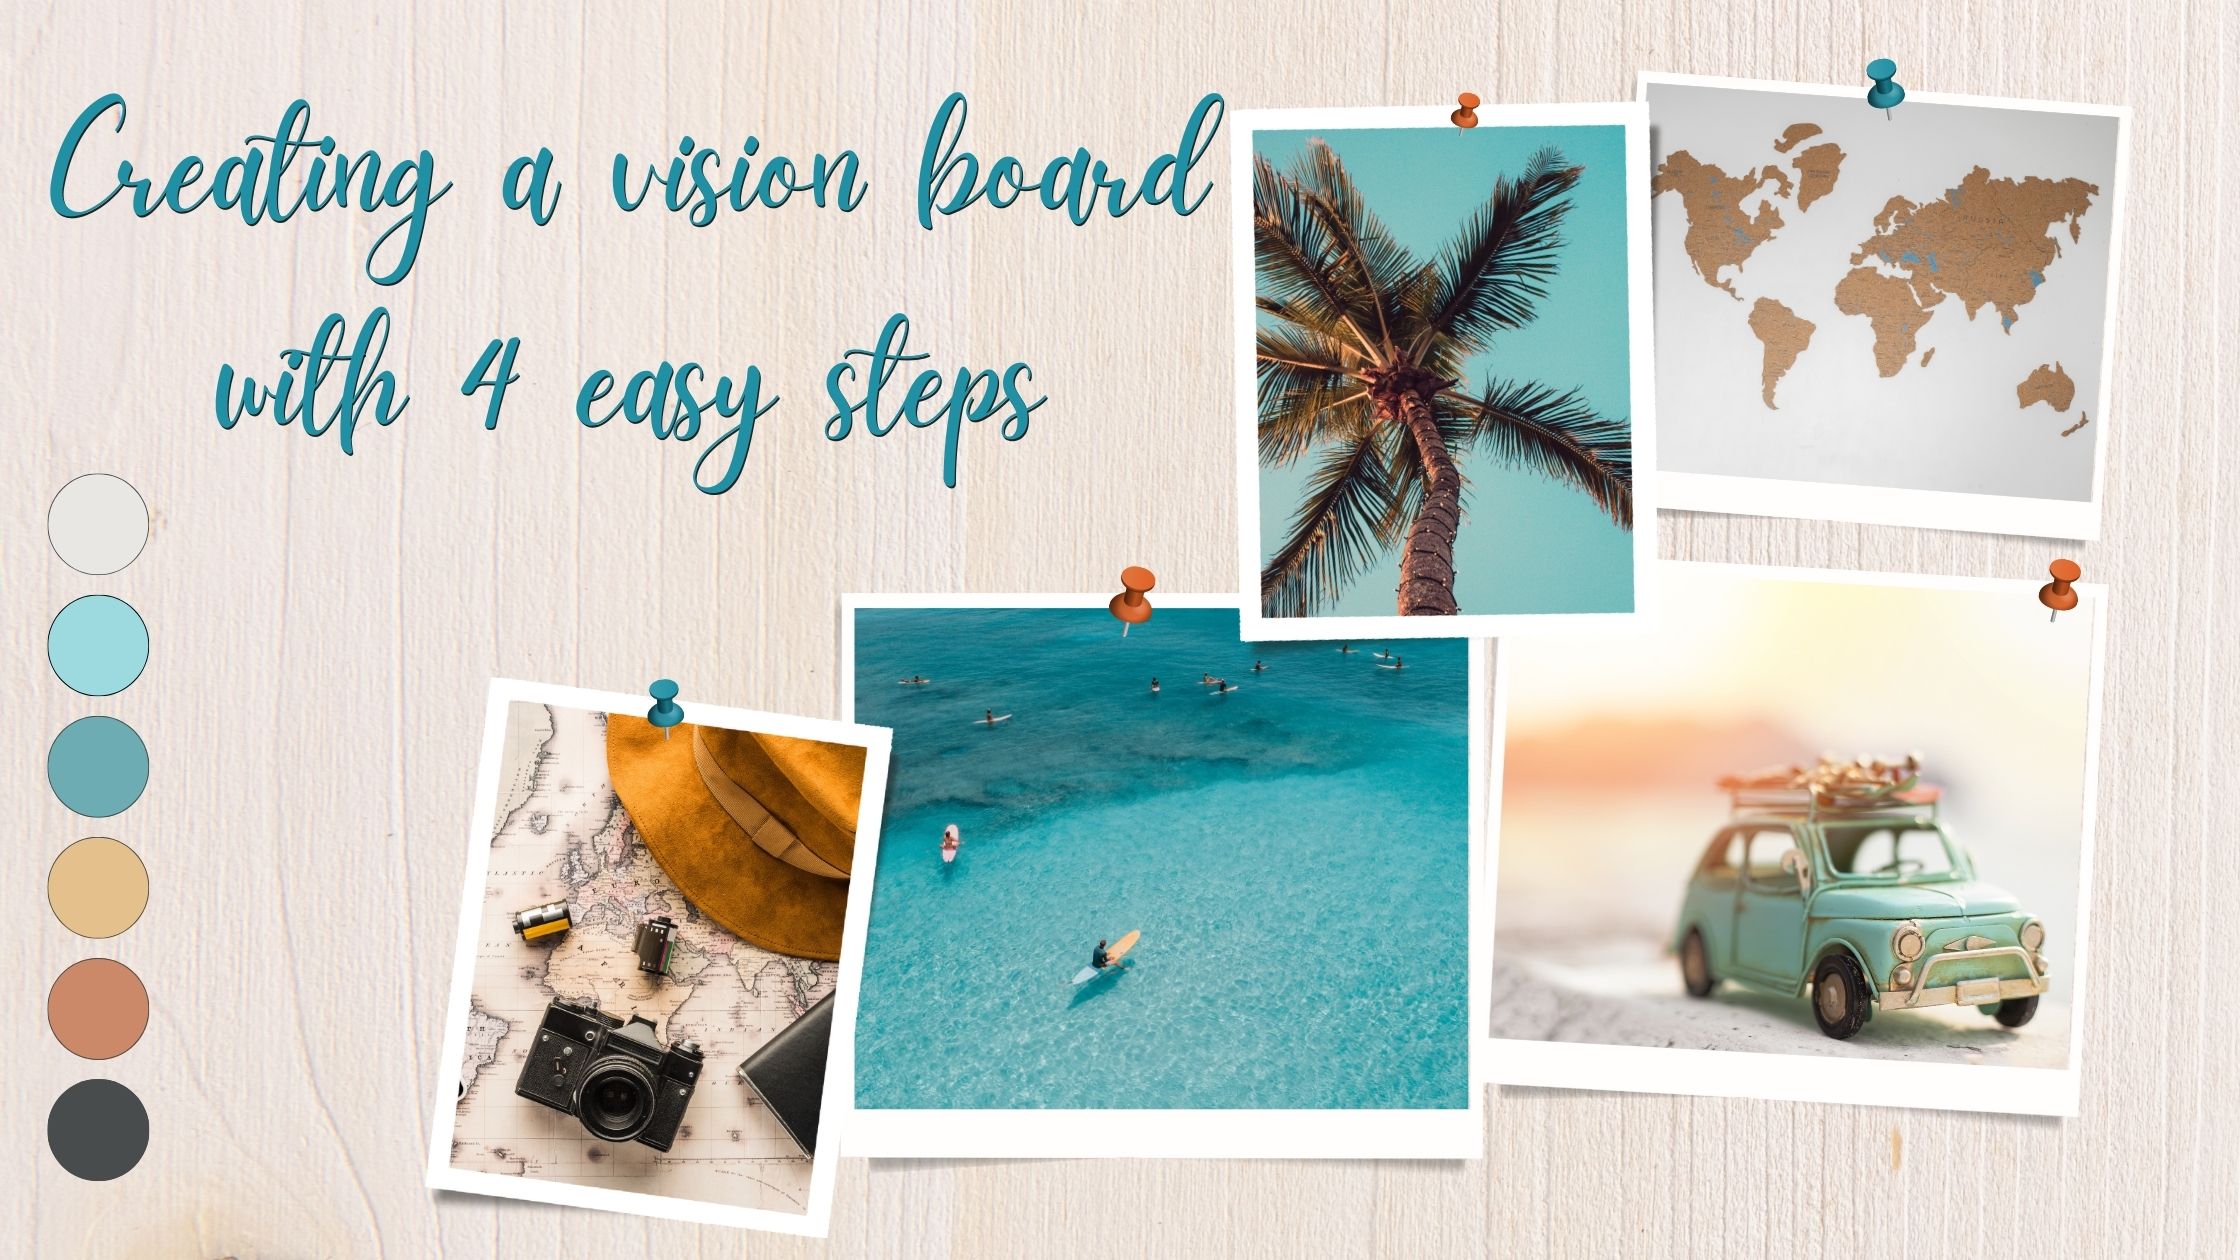 Creating a vision board with 4 easy steps